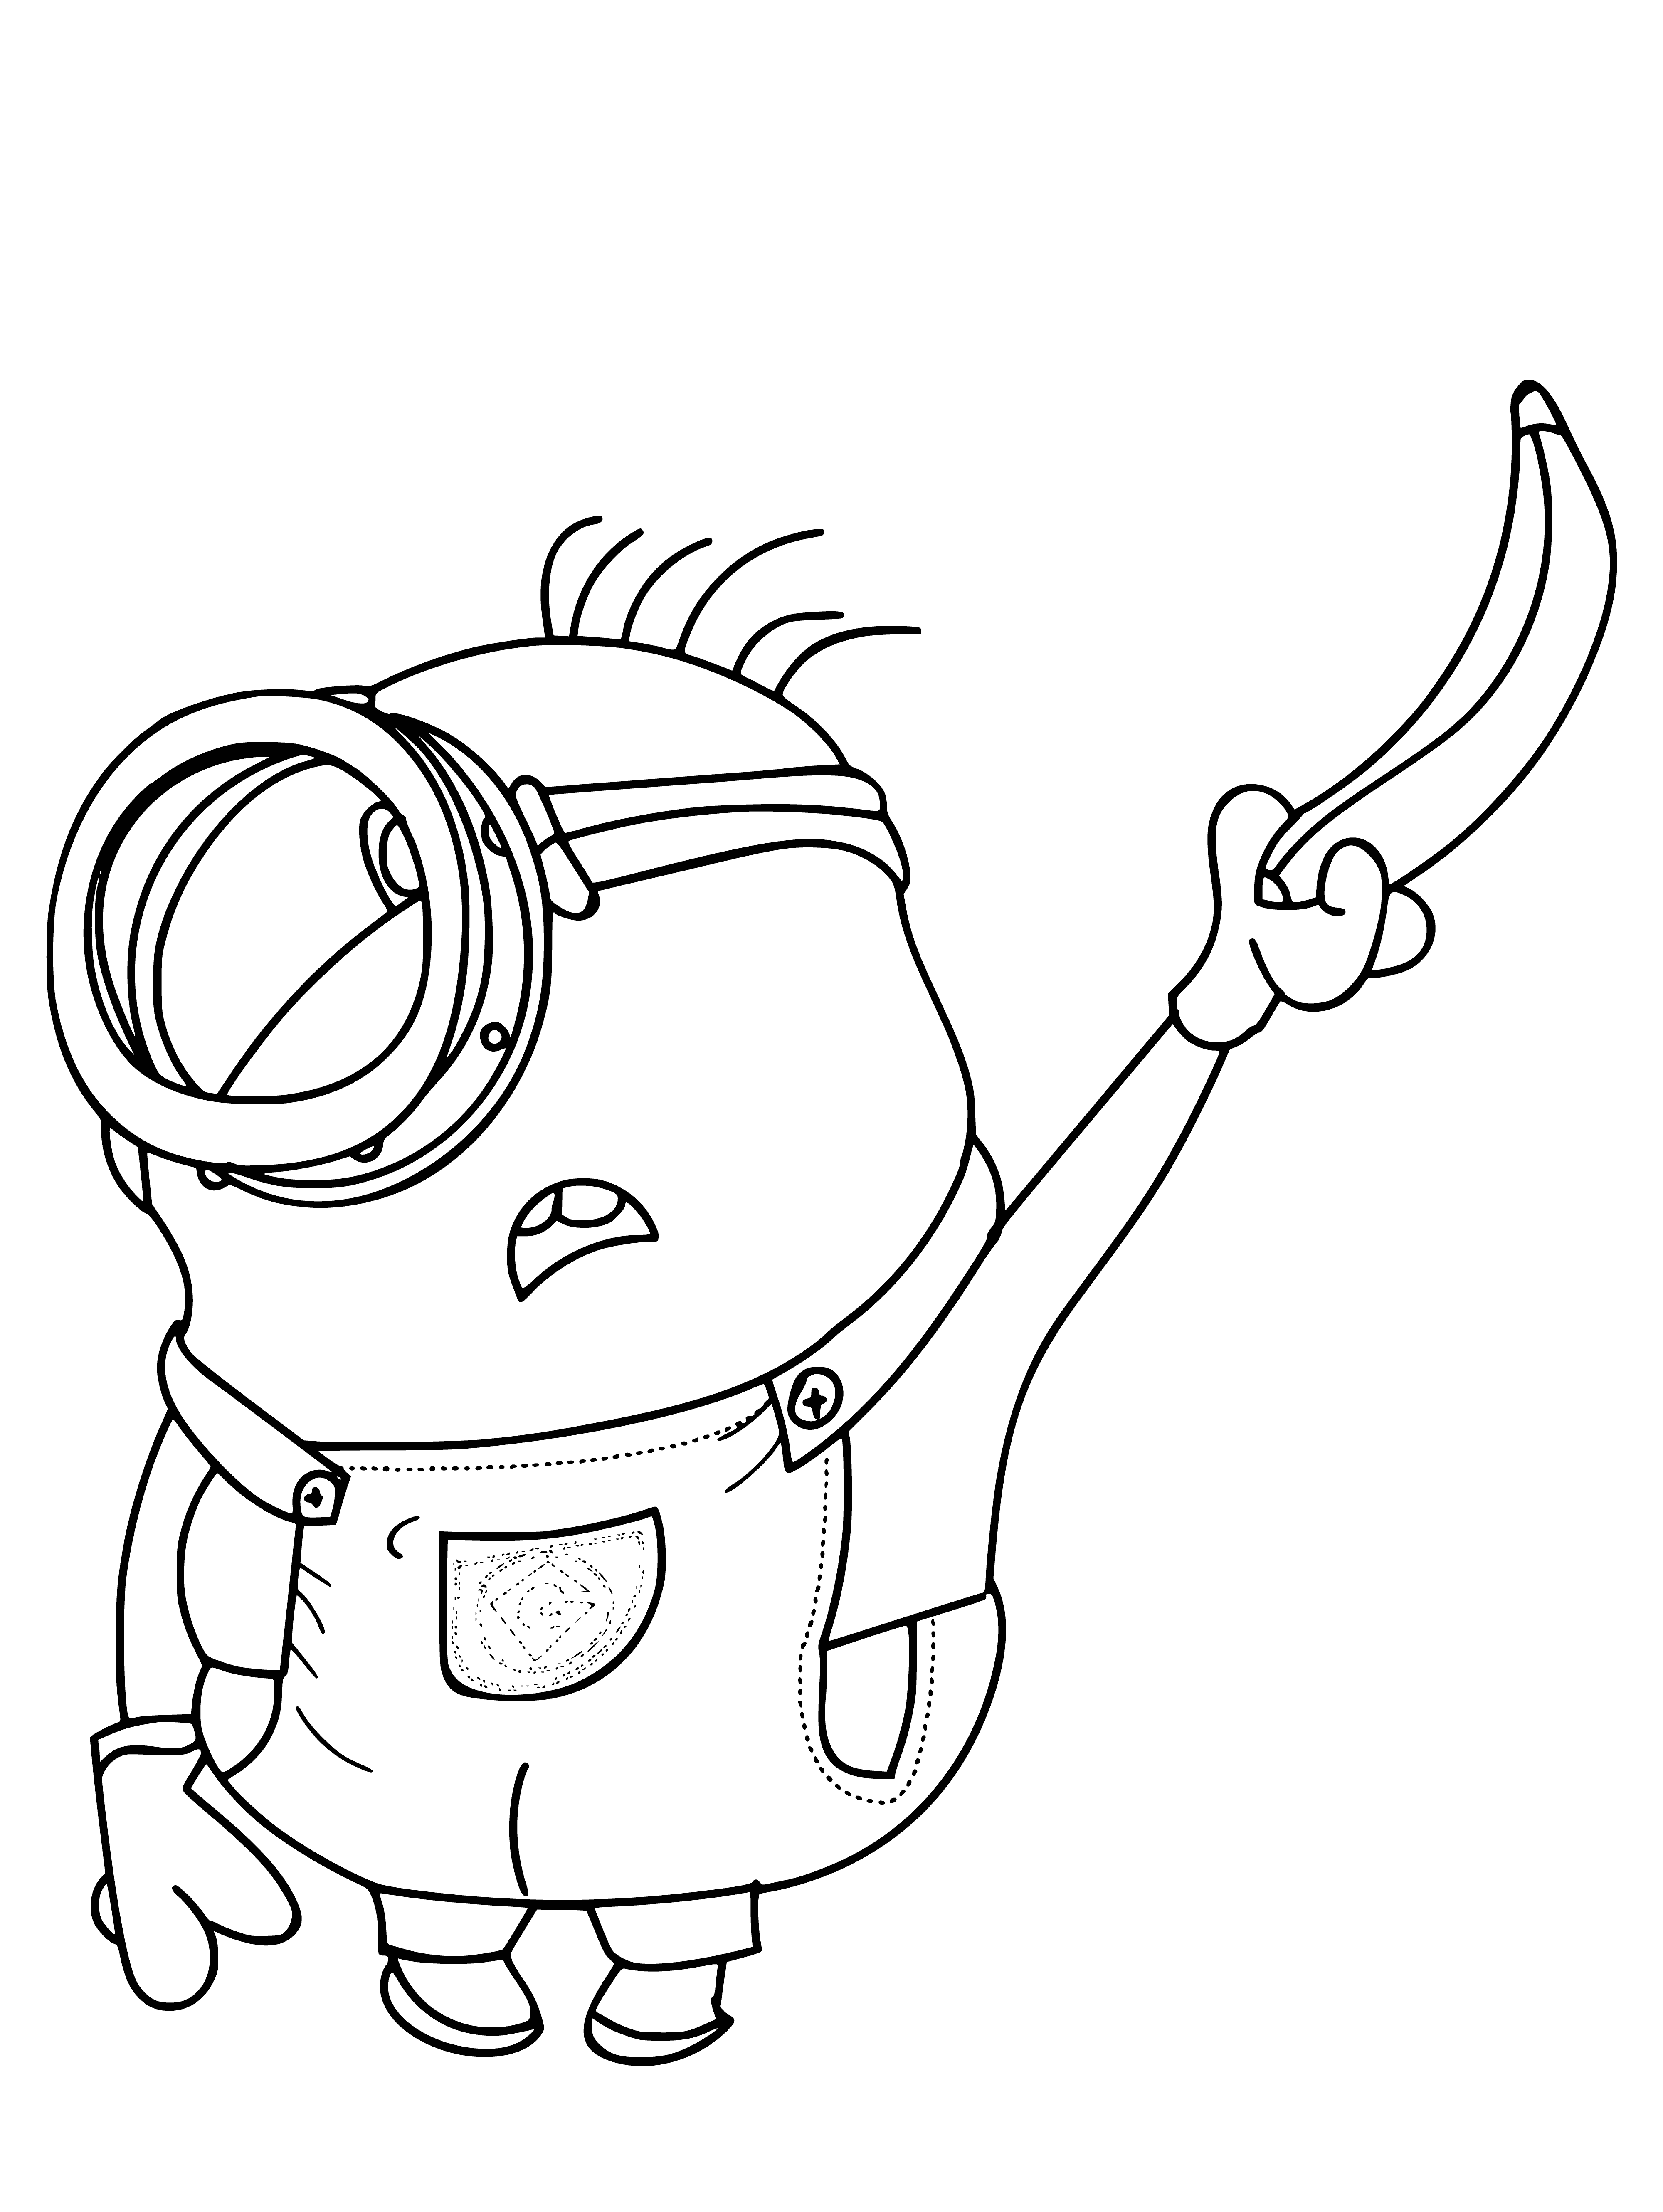 coloring page: Minion with yellow skin holding a brown-spotted yellow banana looks at camera. #coloringpage